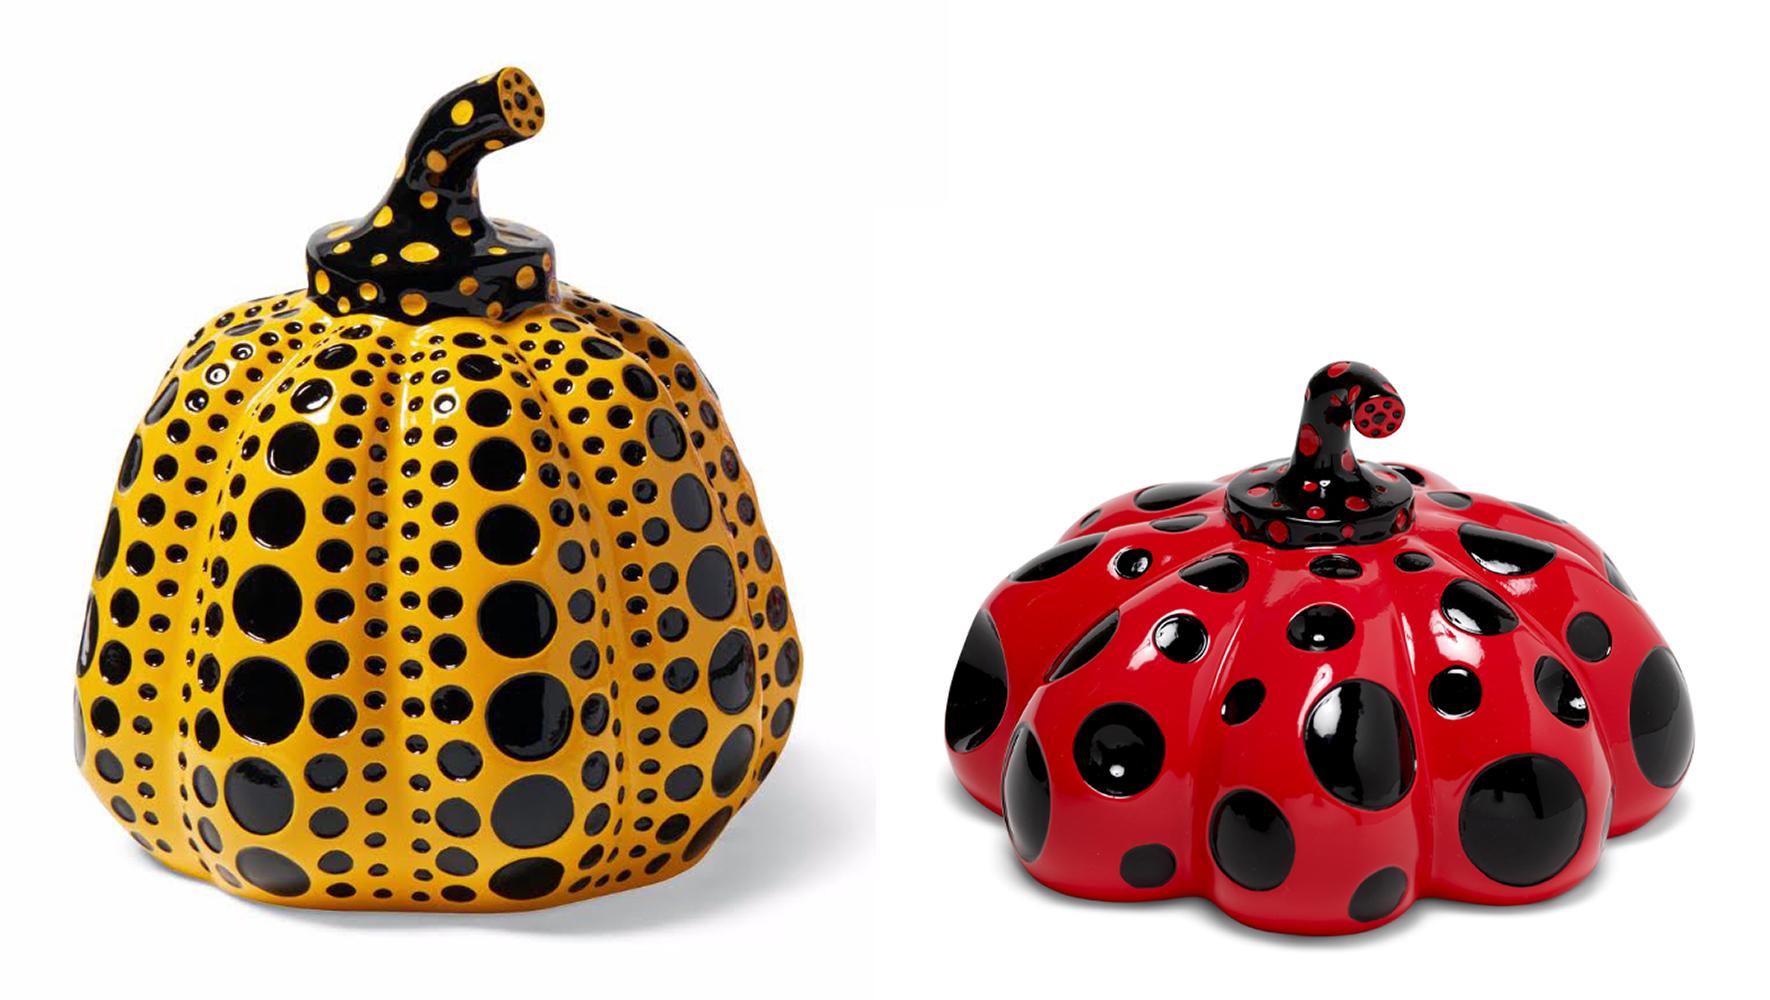 Yayoi Kusama Set of 2 Pumpkins: Yellow and Black & Red & Black Naoshima:

An iconic, vibrantly colored pop art set - these small Kusama pumpkin sculptures feature the universal polka dot patterns and bold colors for which the artist is perhaps best